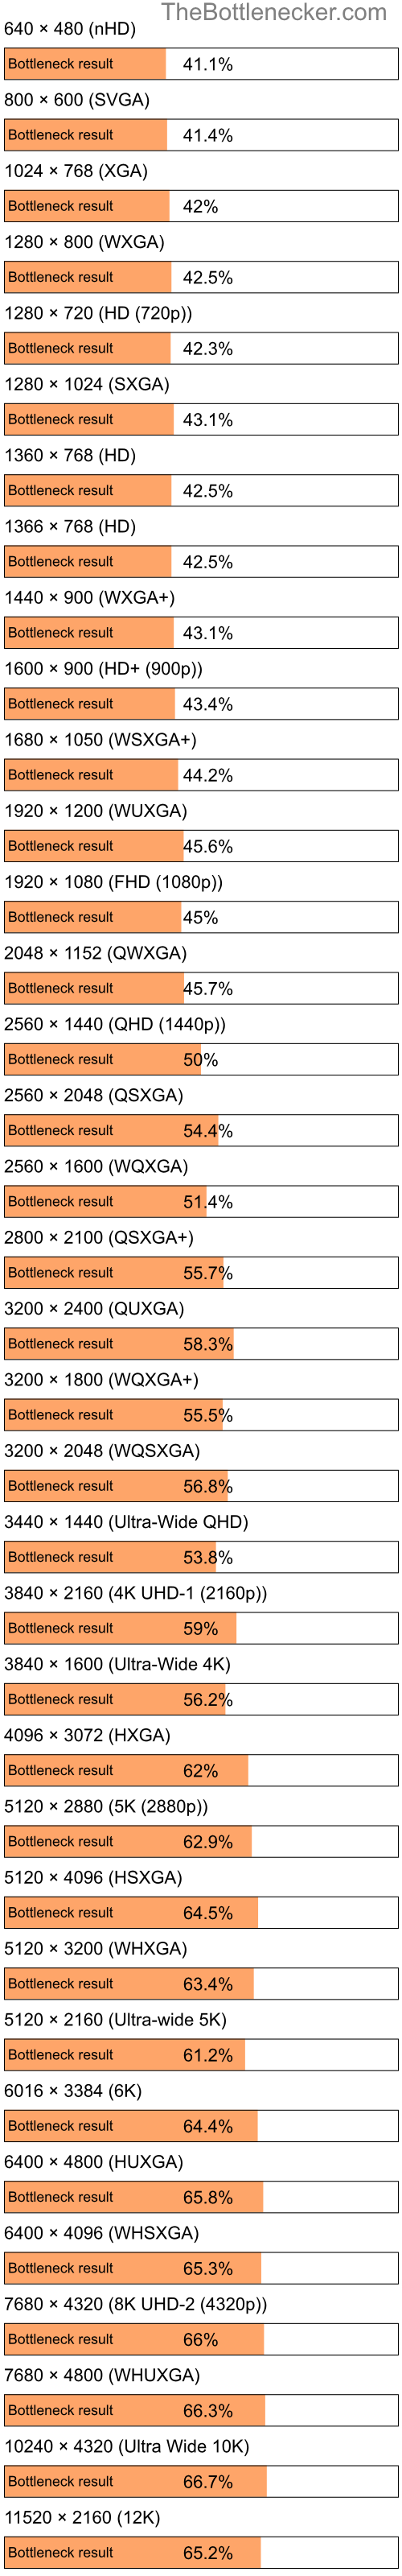 Bottleneck results by resolution for Intel Core i7-14700KF and NVIDIA GeForce GTX 1650 in Graphic Card Intense Tasks